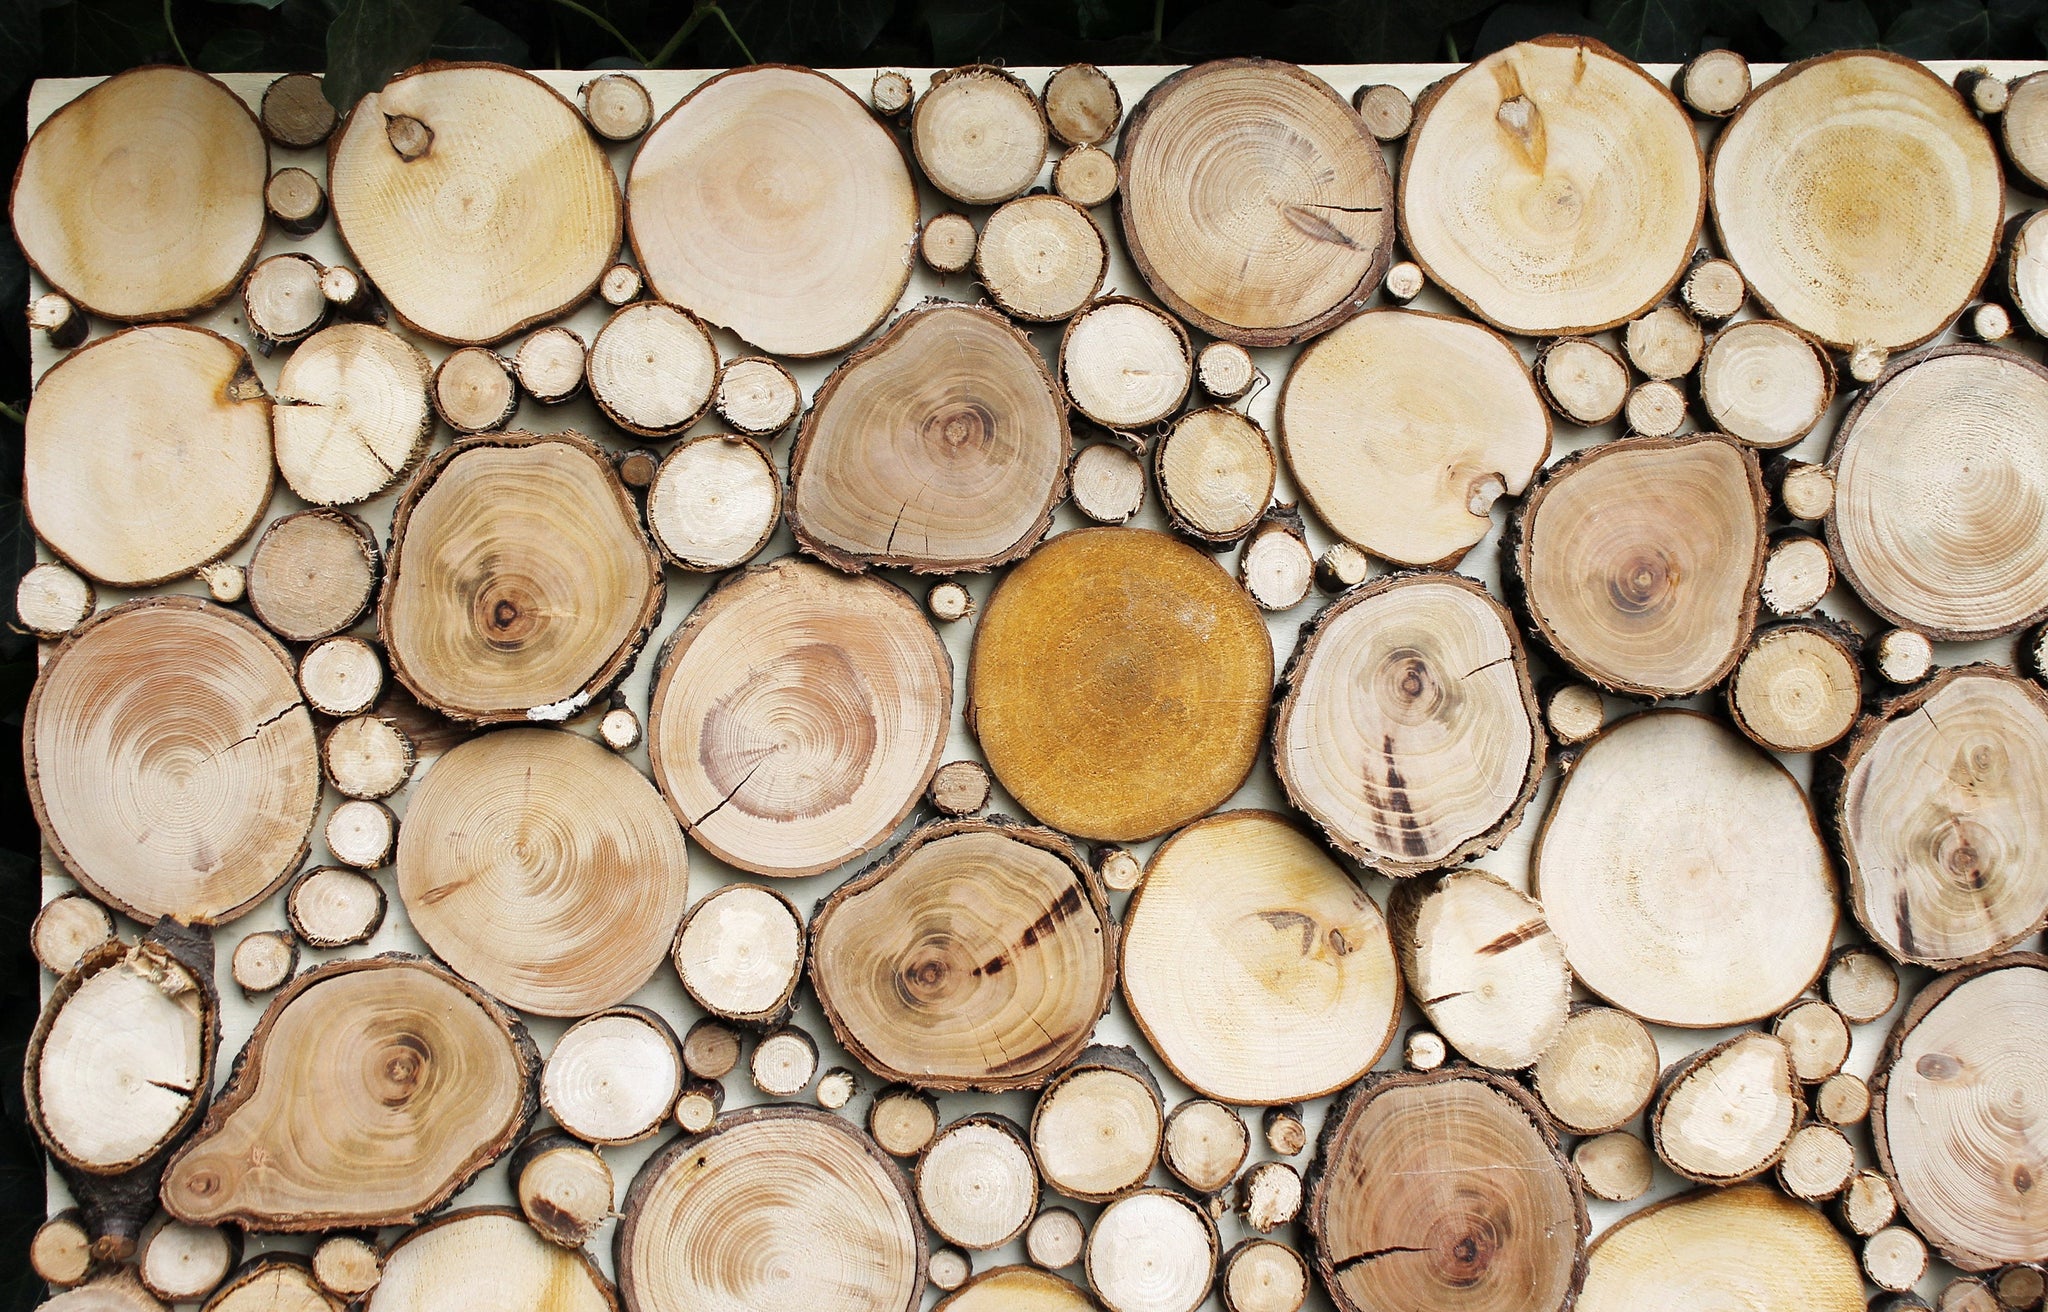 Rustic wooden slices picture - wood slices mosaic - natural wooden